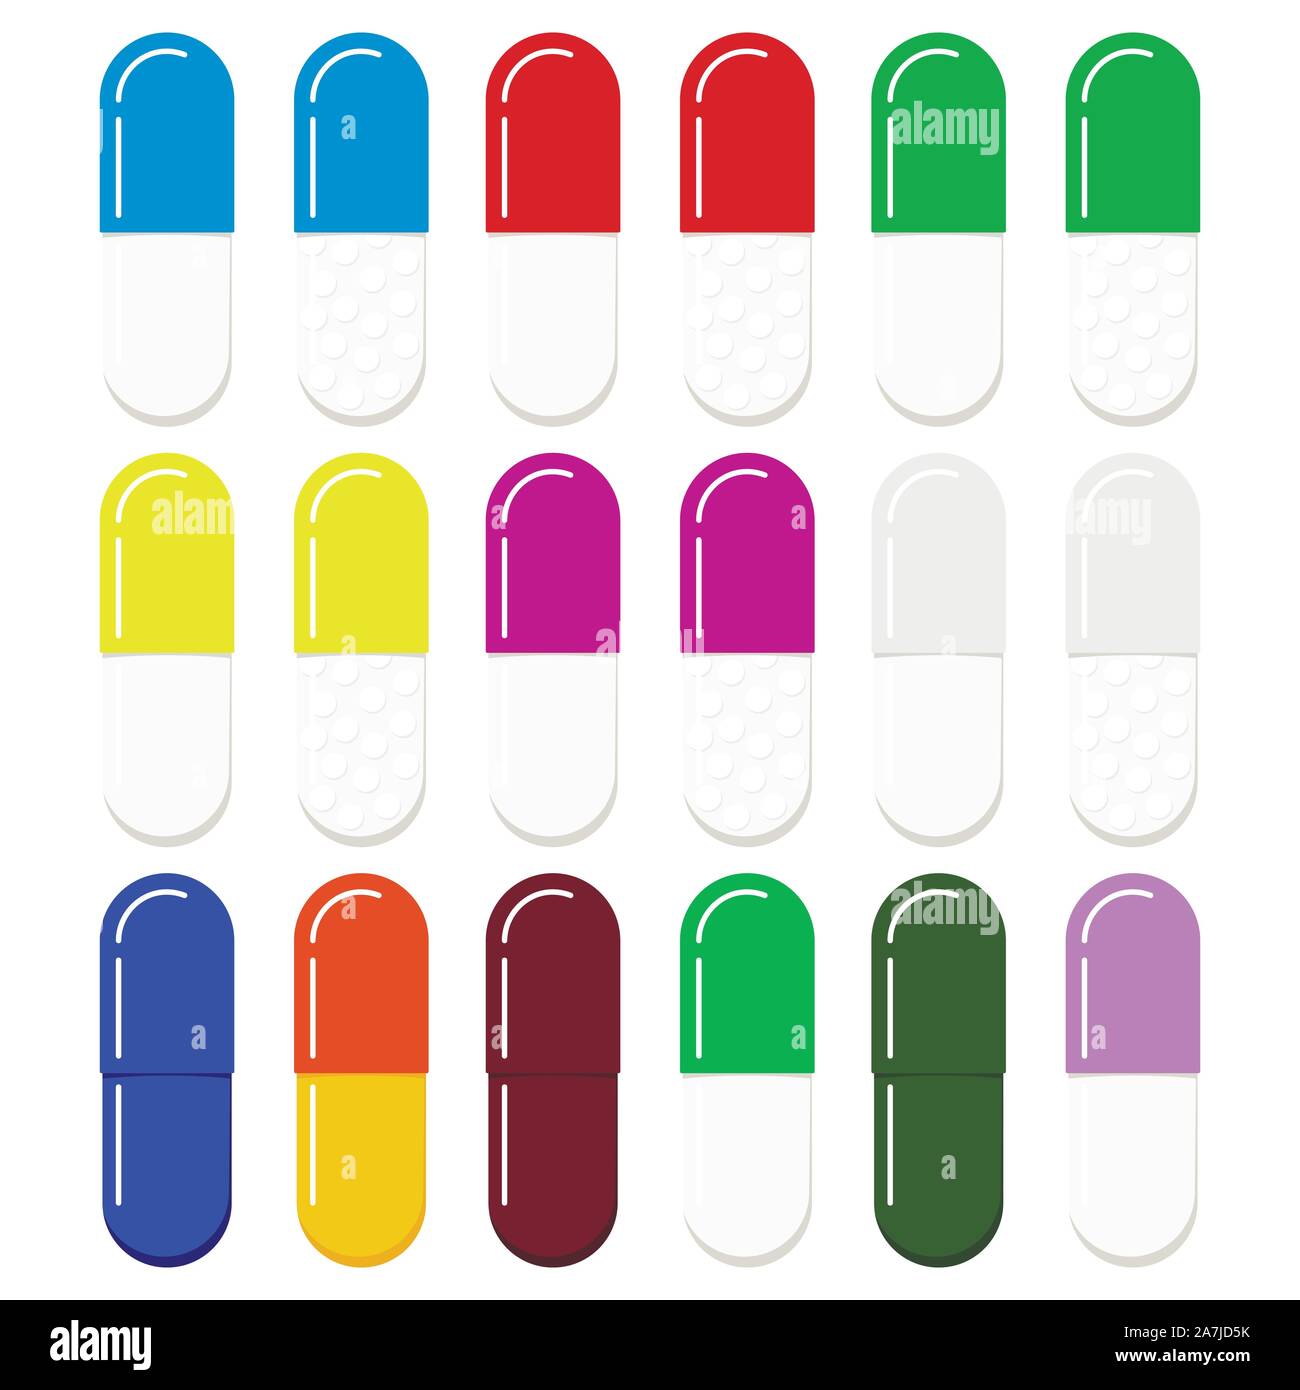 Colorful gelatin medical capsules templates set isolated on white background. Stock Vector